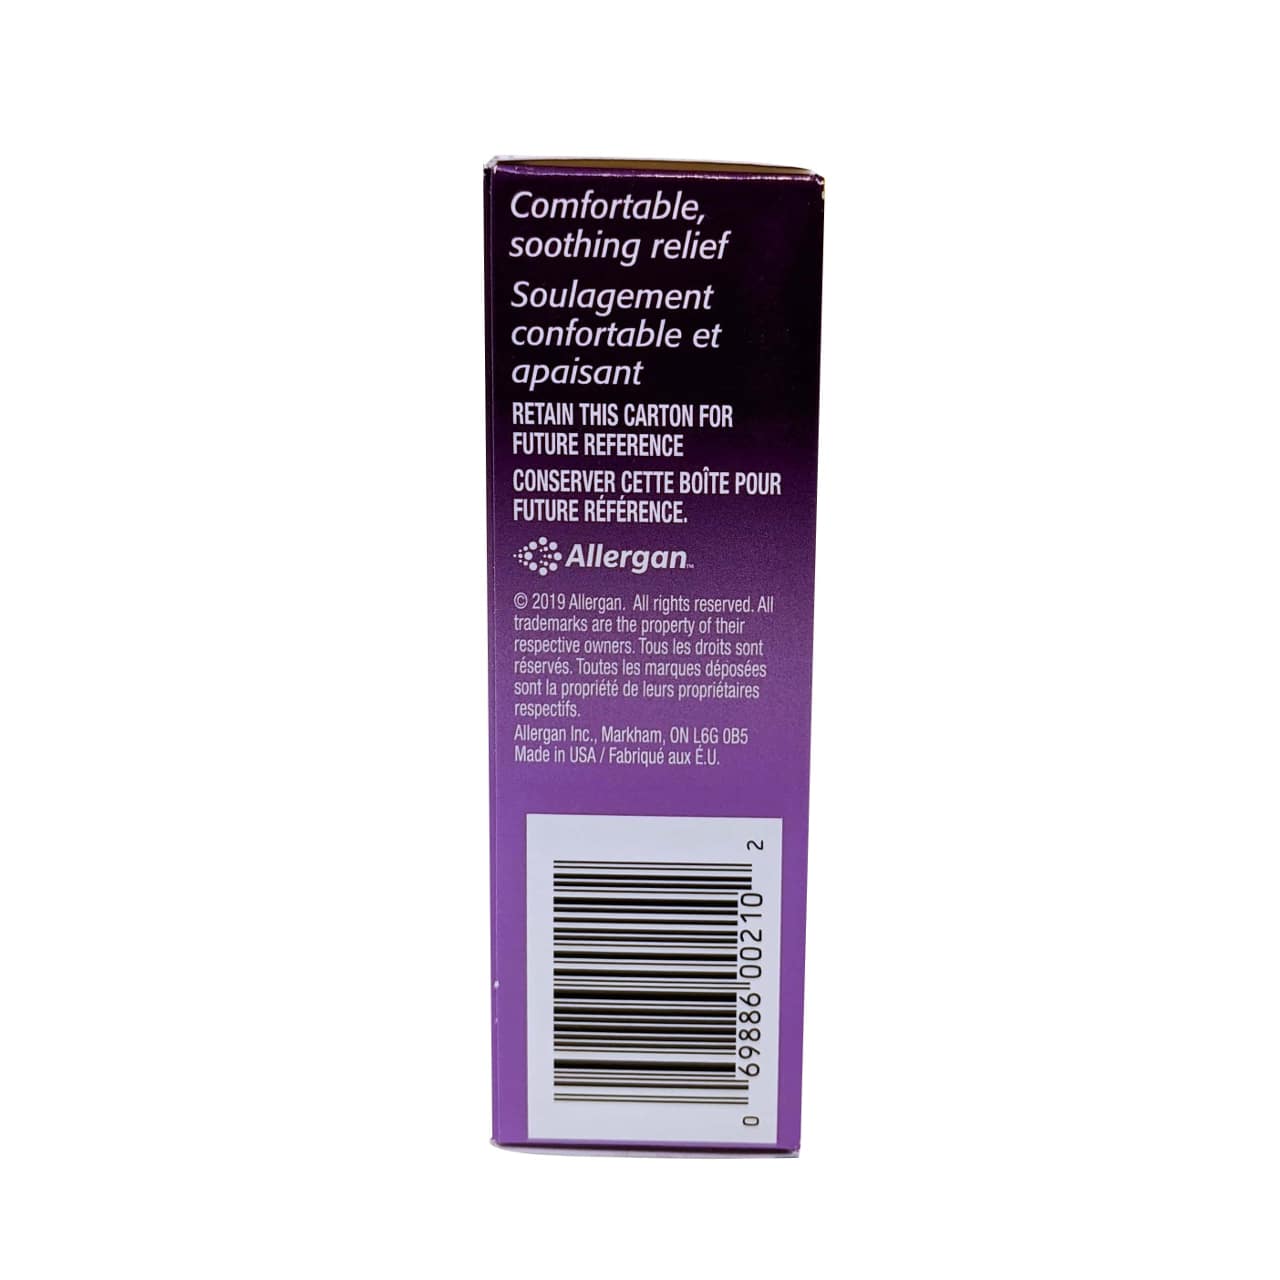 Product information for Allergan Tears Plus Lubricating Eye Drops 2 x 15 mL in English and French